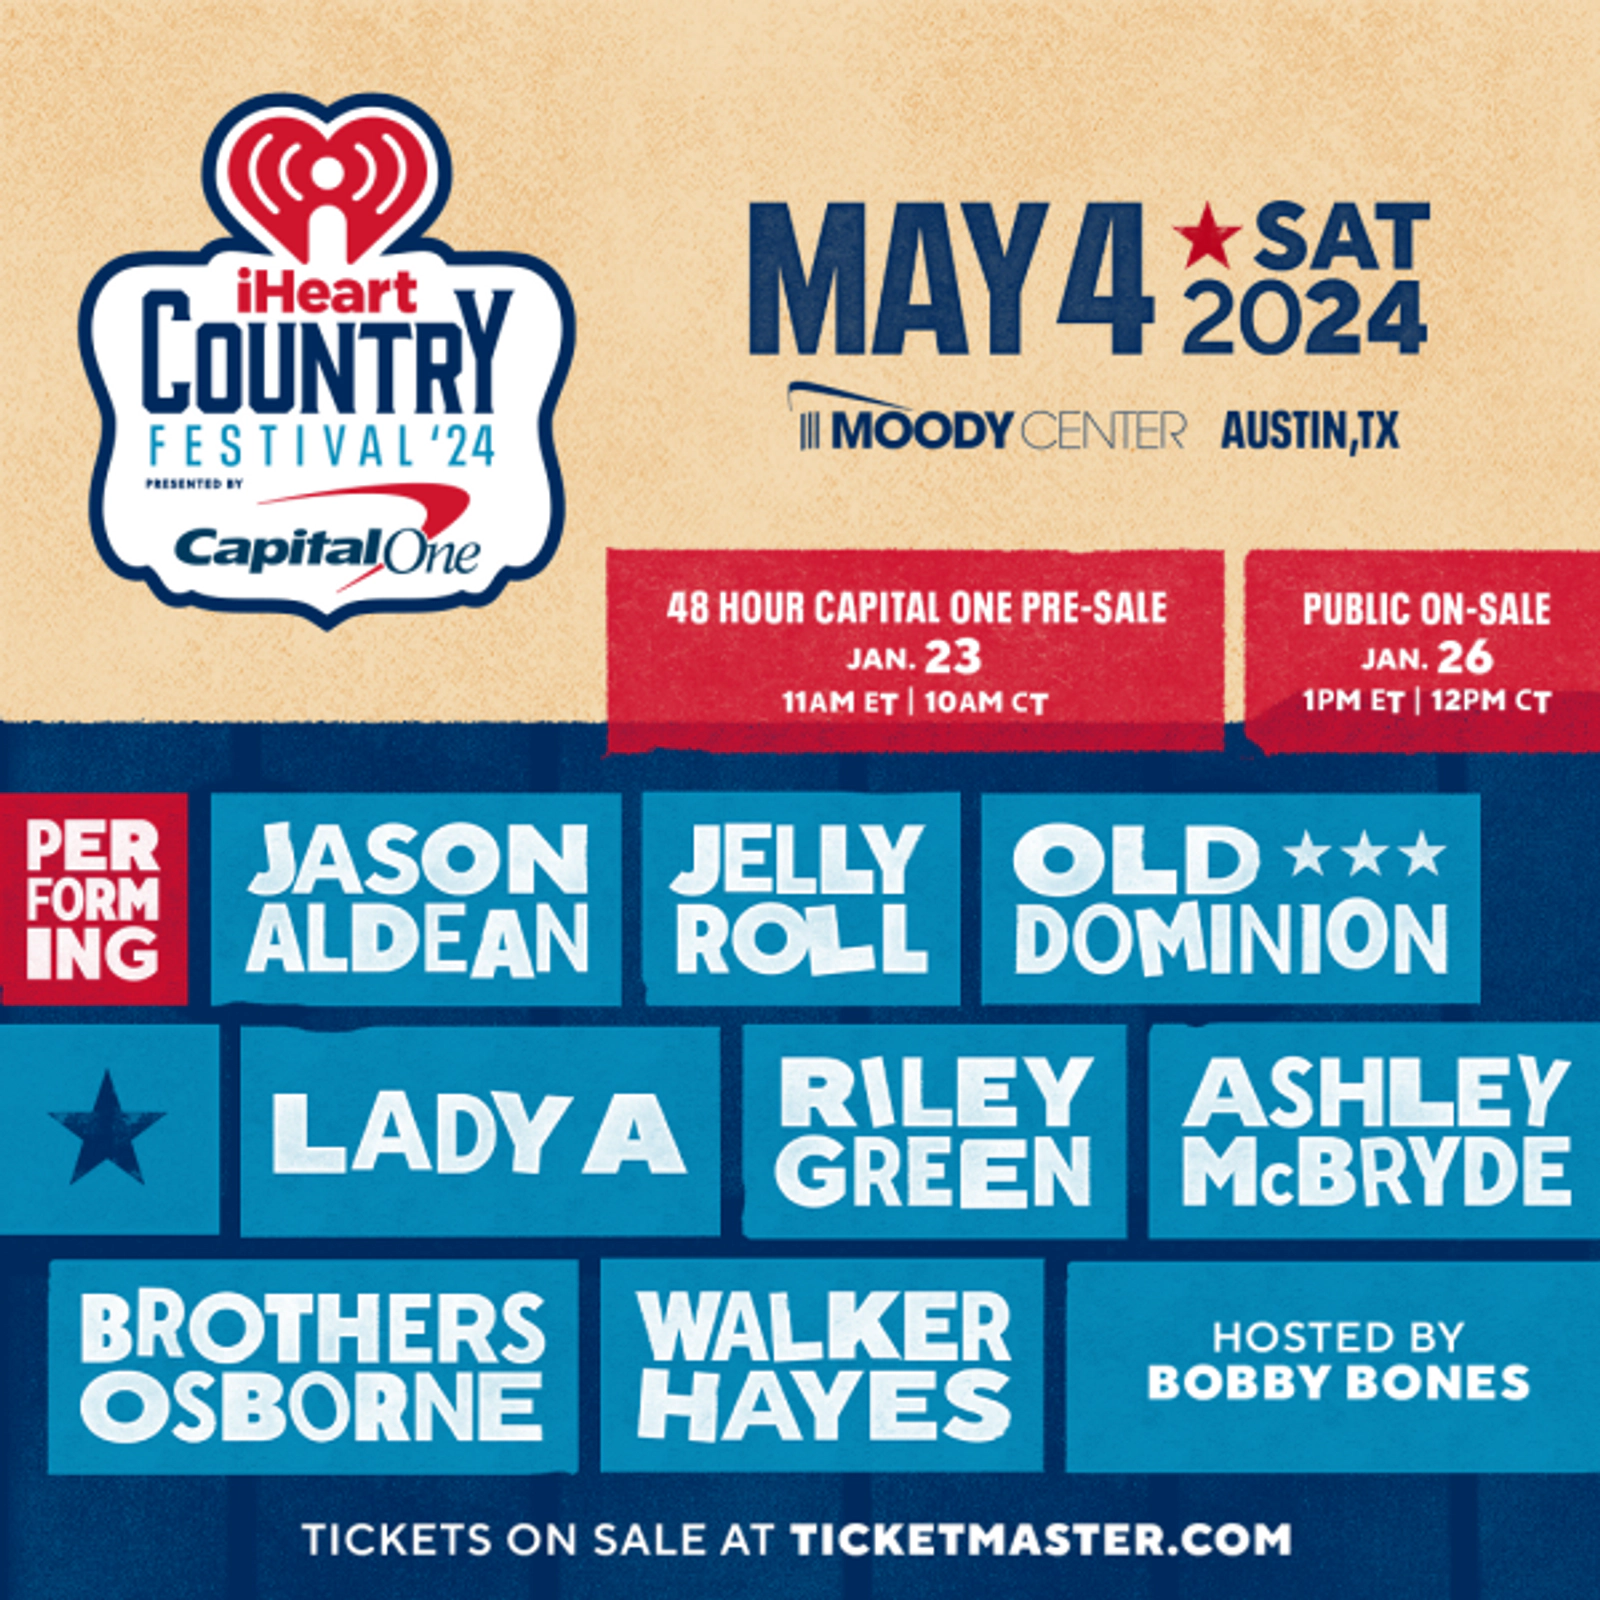 Win tickets to iHeartCountry Festival 2024! 98.1 KVET 98.1 KVET